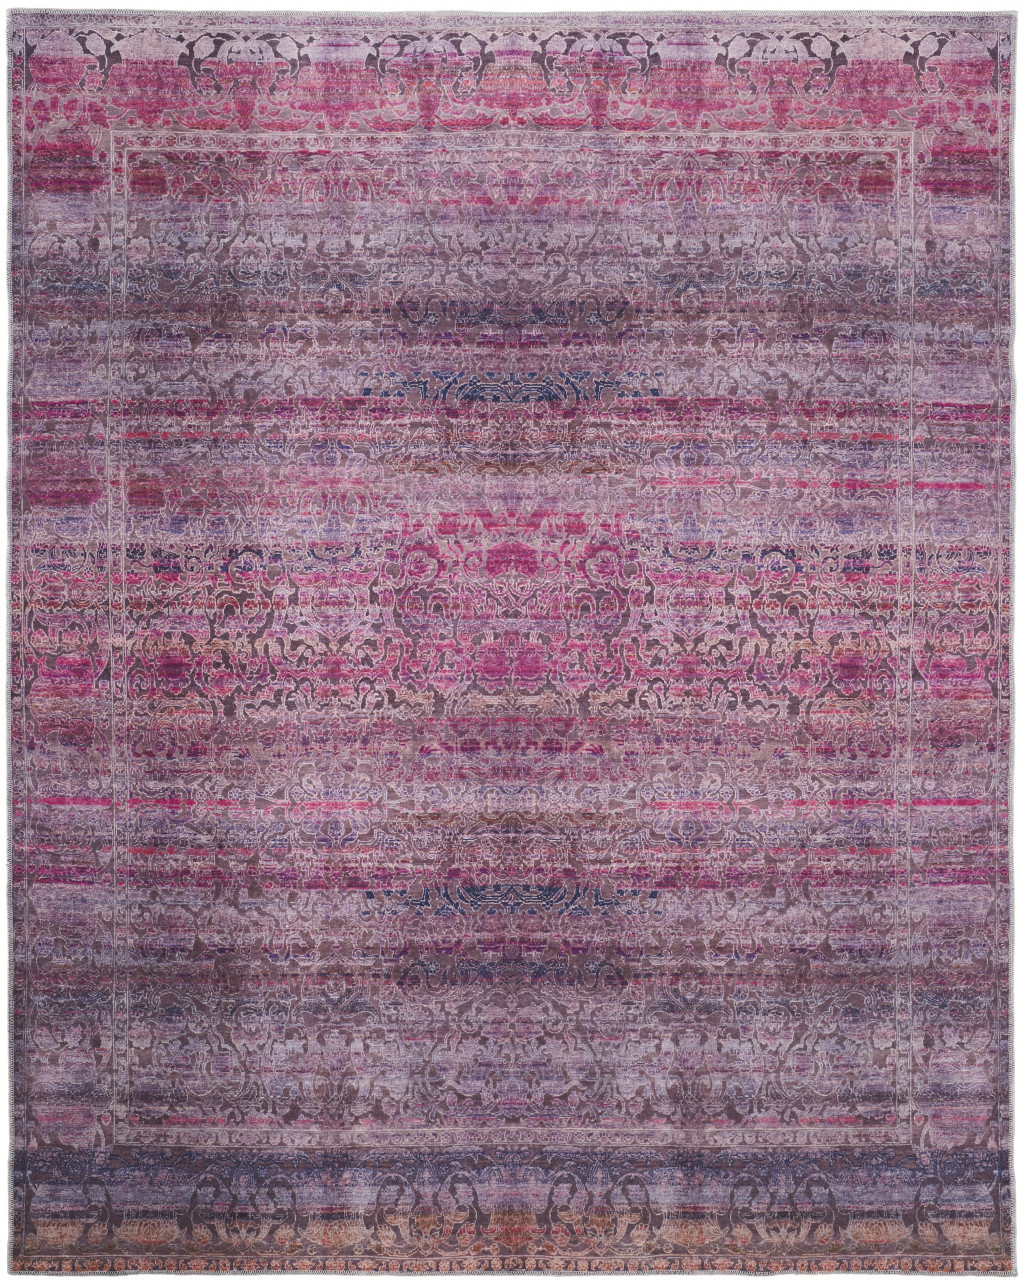 10' X 14' Pink And Purple Floral Power Loom Area Rug-515193-1